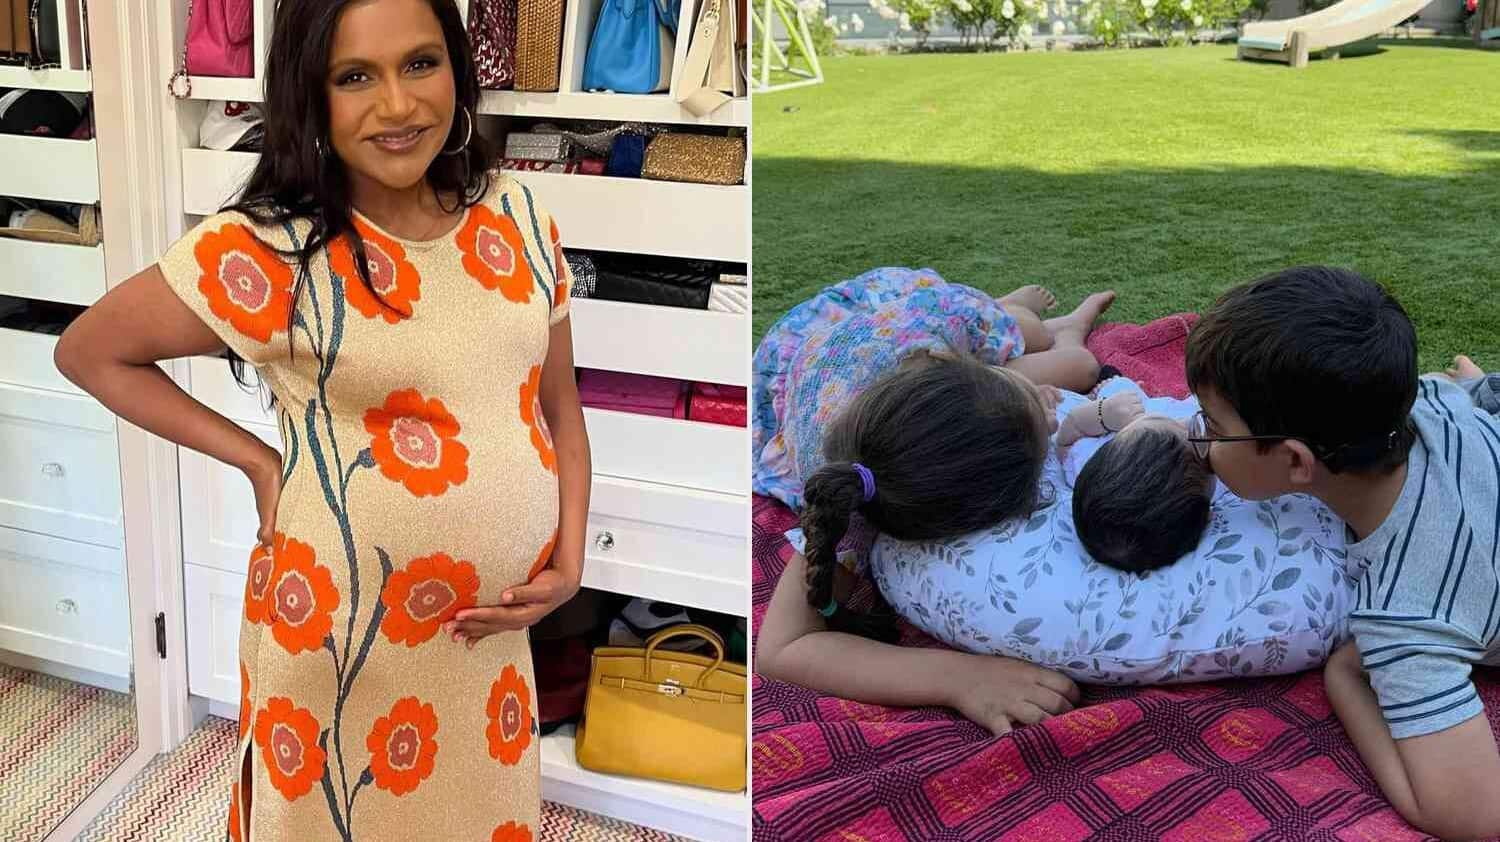 Mindy Kaling shares she welcomed her third baby in February